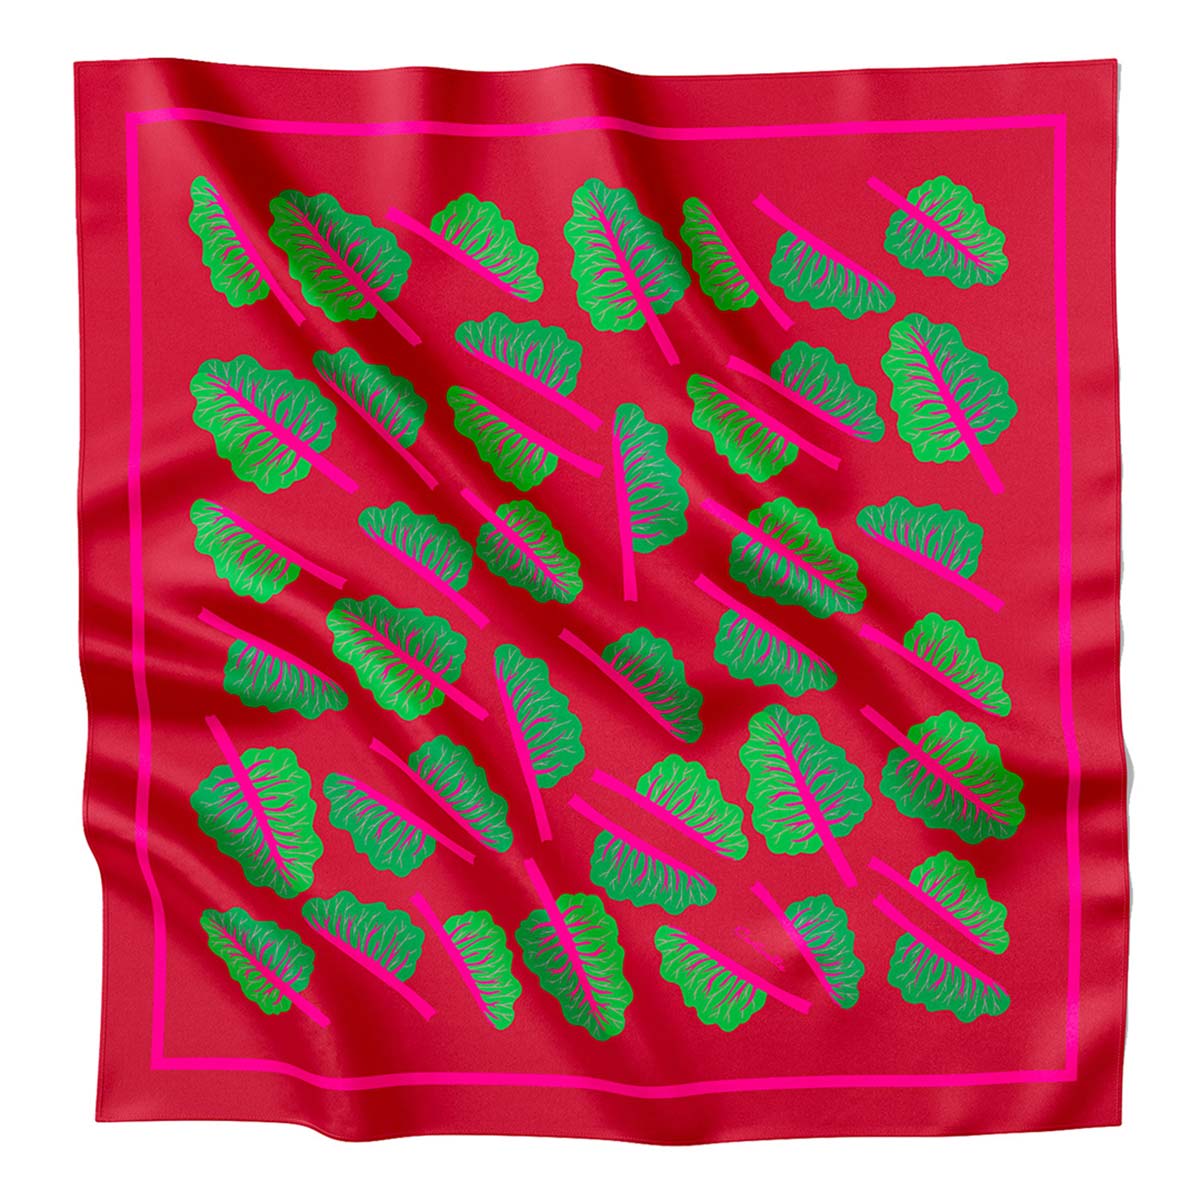 Red silk scarf with green chard and pink details.